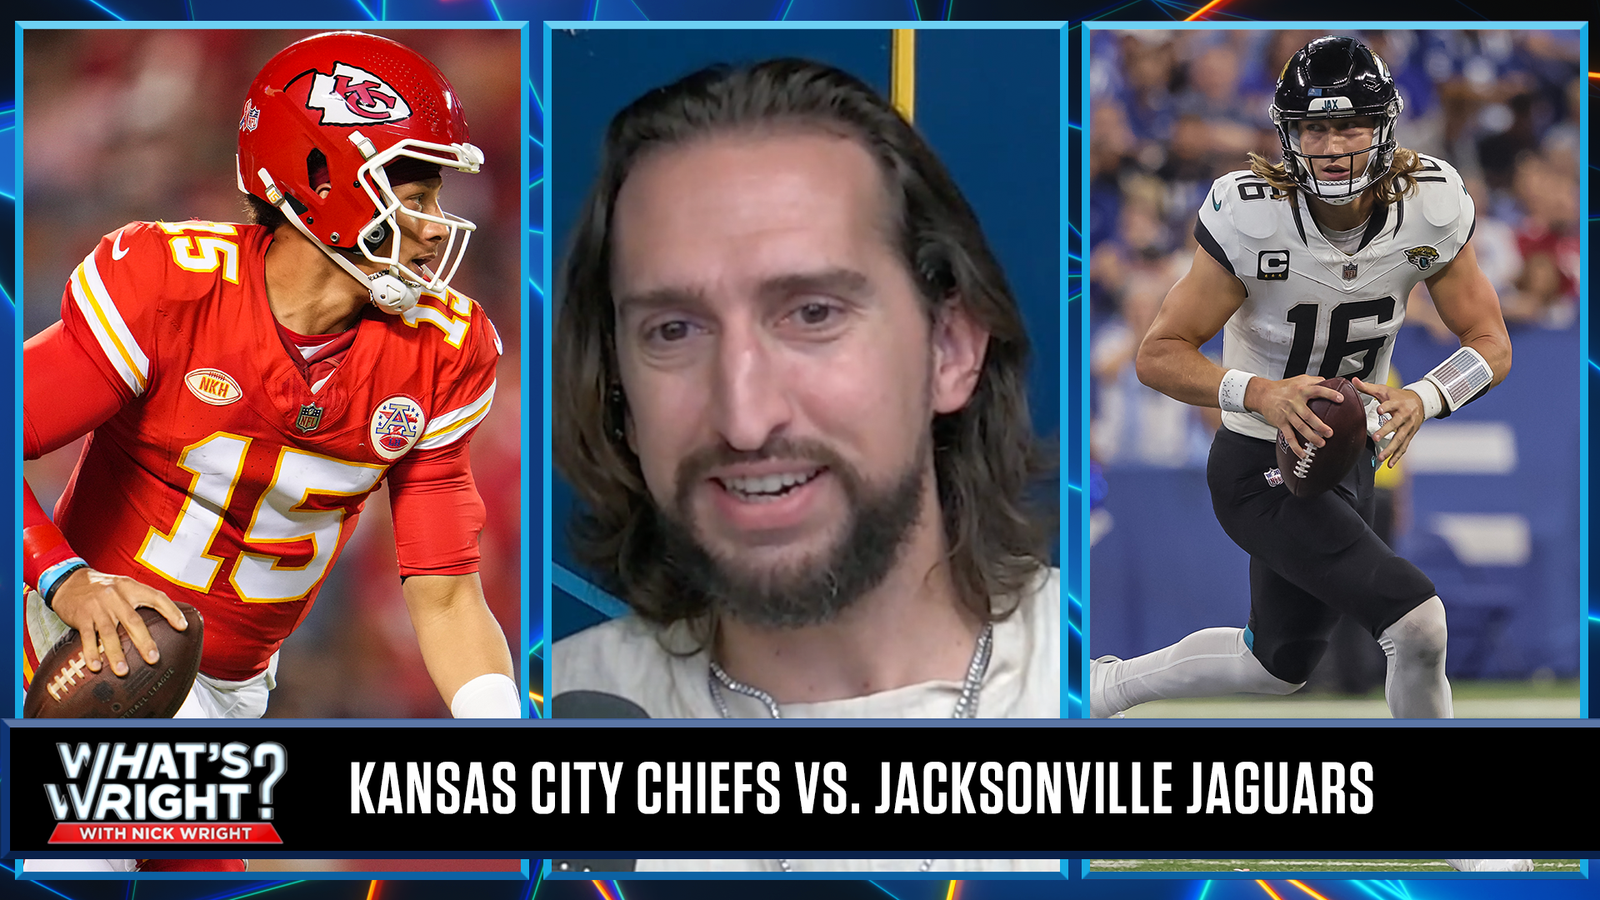 Trevor Lawrence and Jags look to dethrone Patrick Mahomes and Chiefs in Week 2 